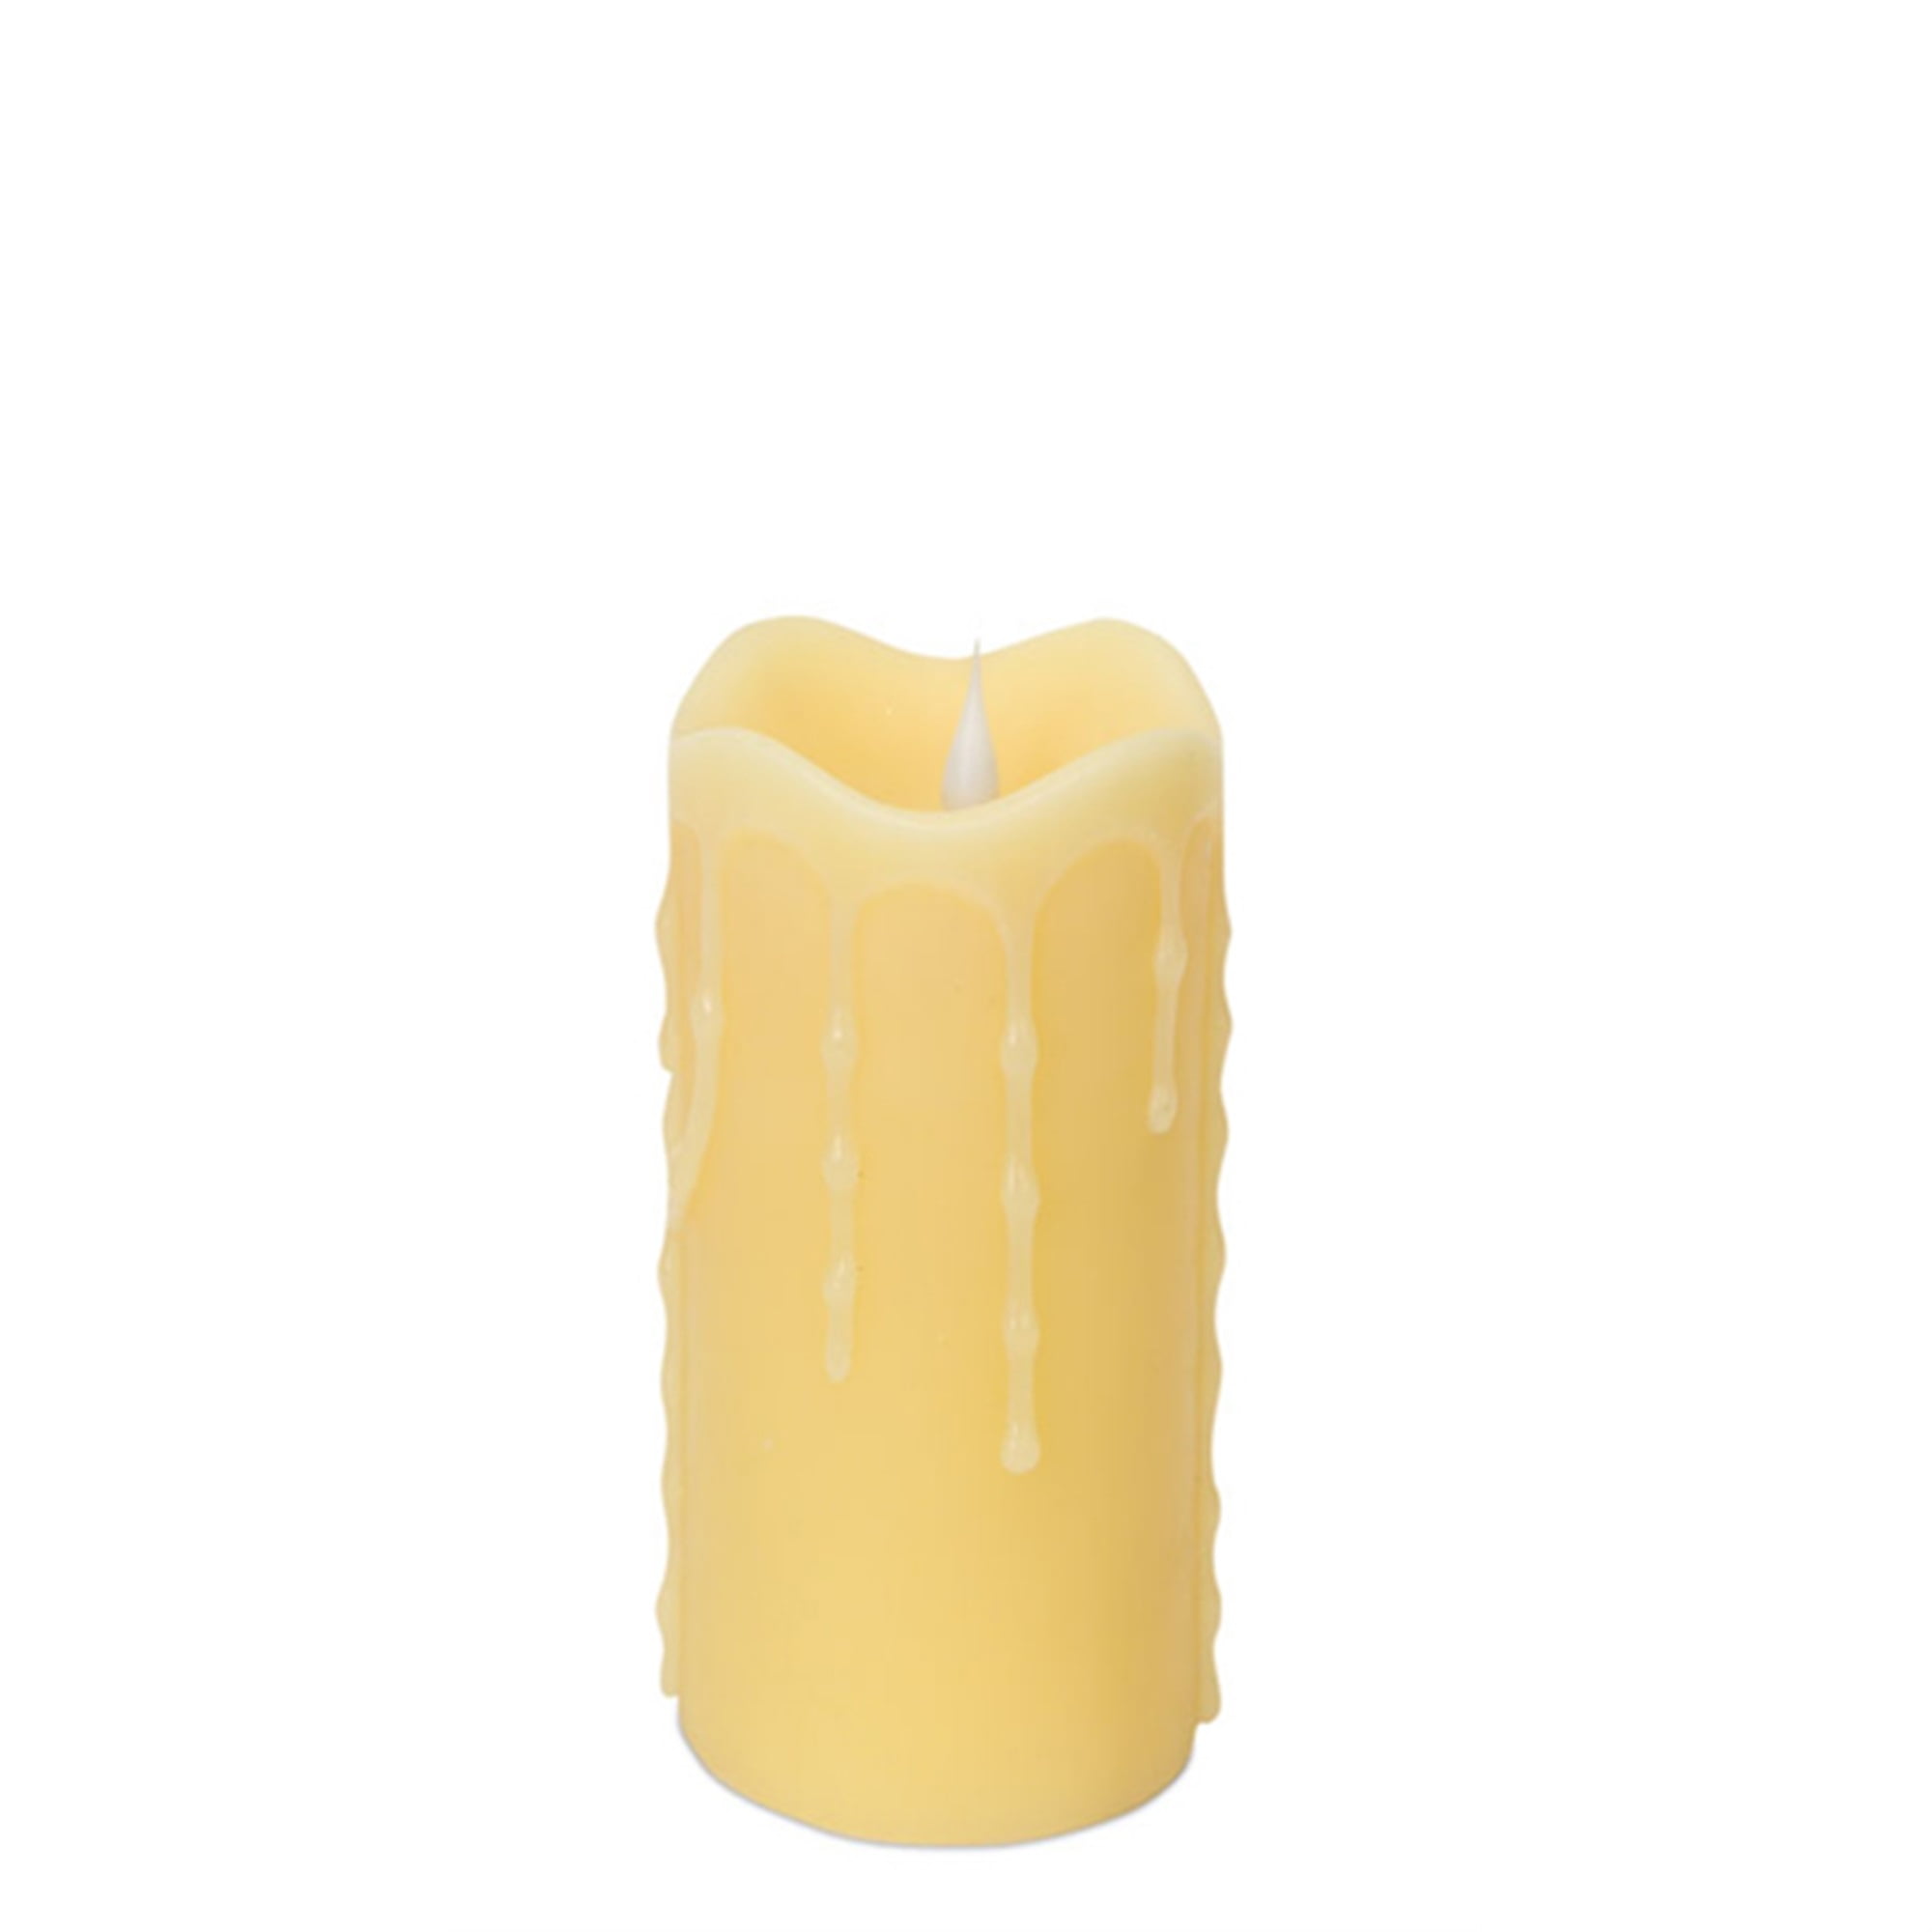 Simplux LED Dripping Candle w/Moving Flame (Set of 2) 3"D x 5"H